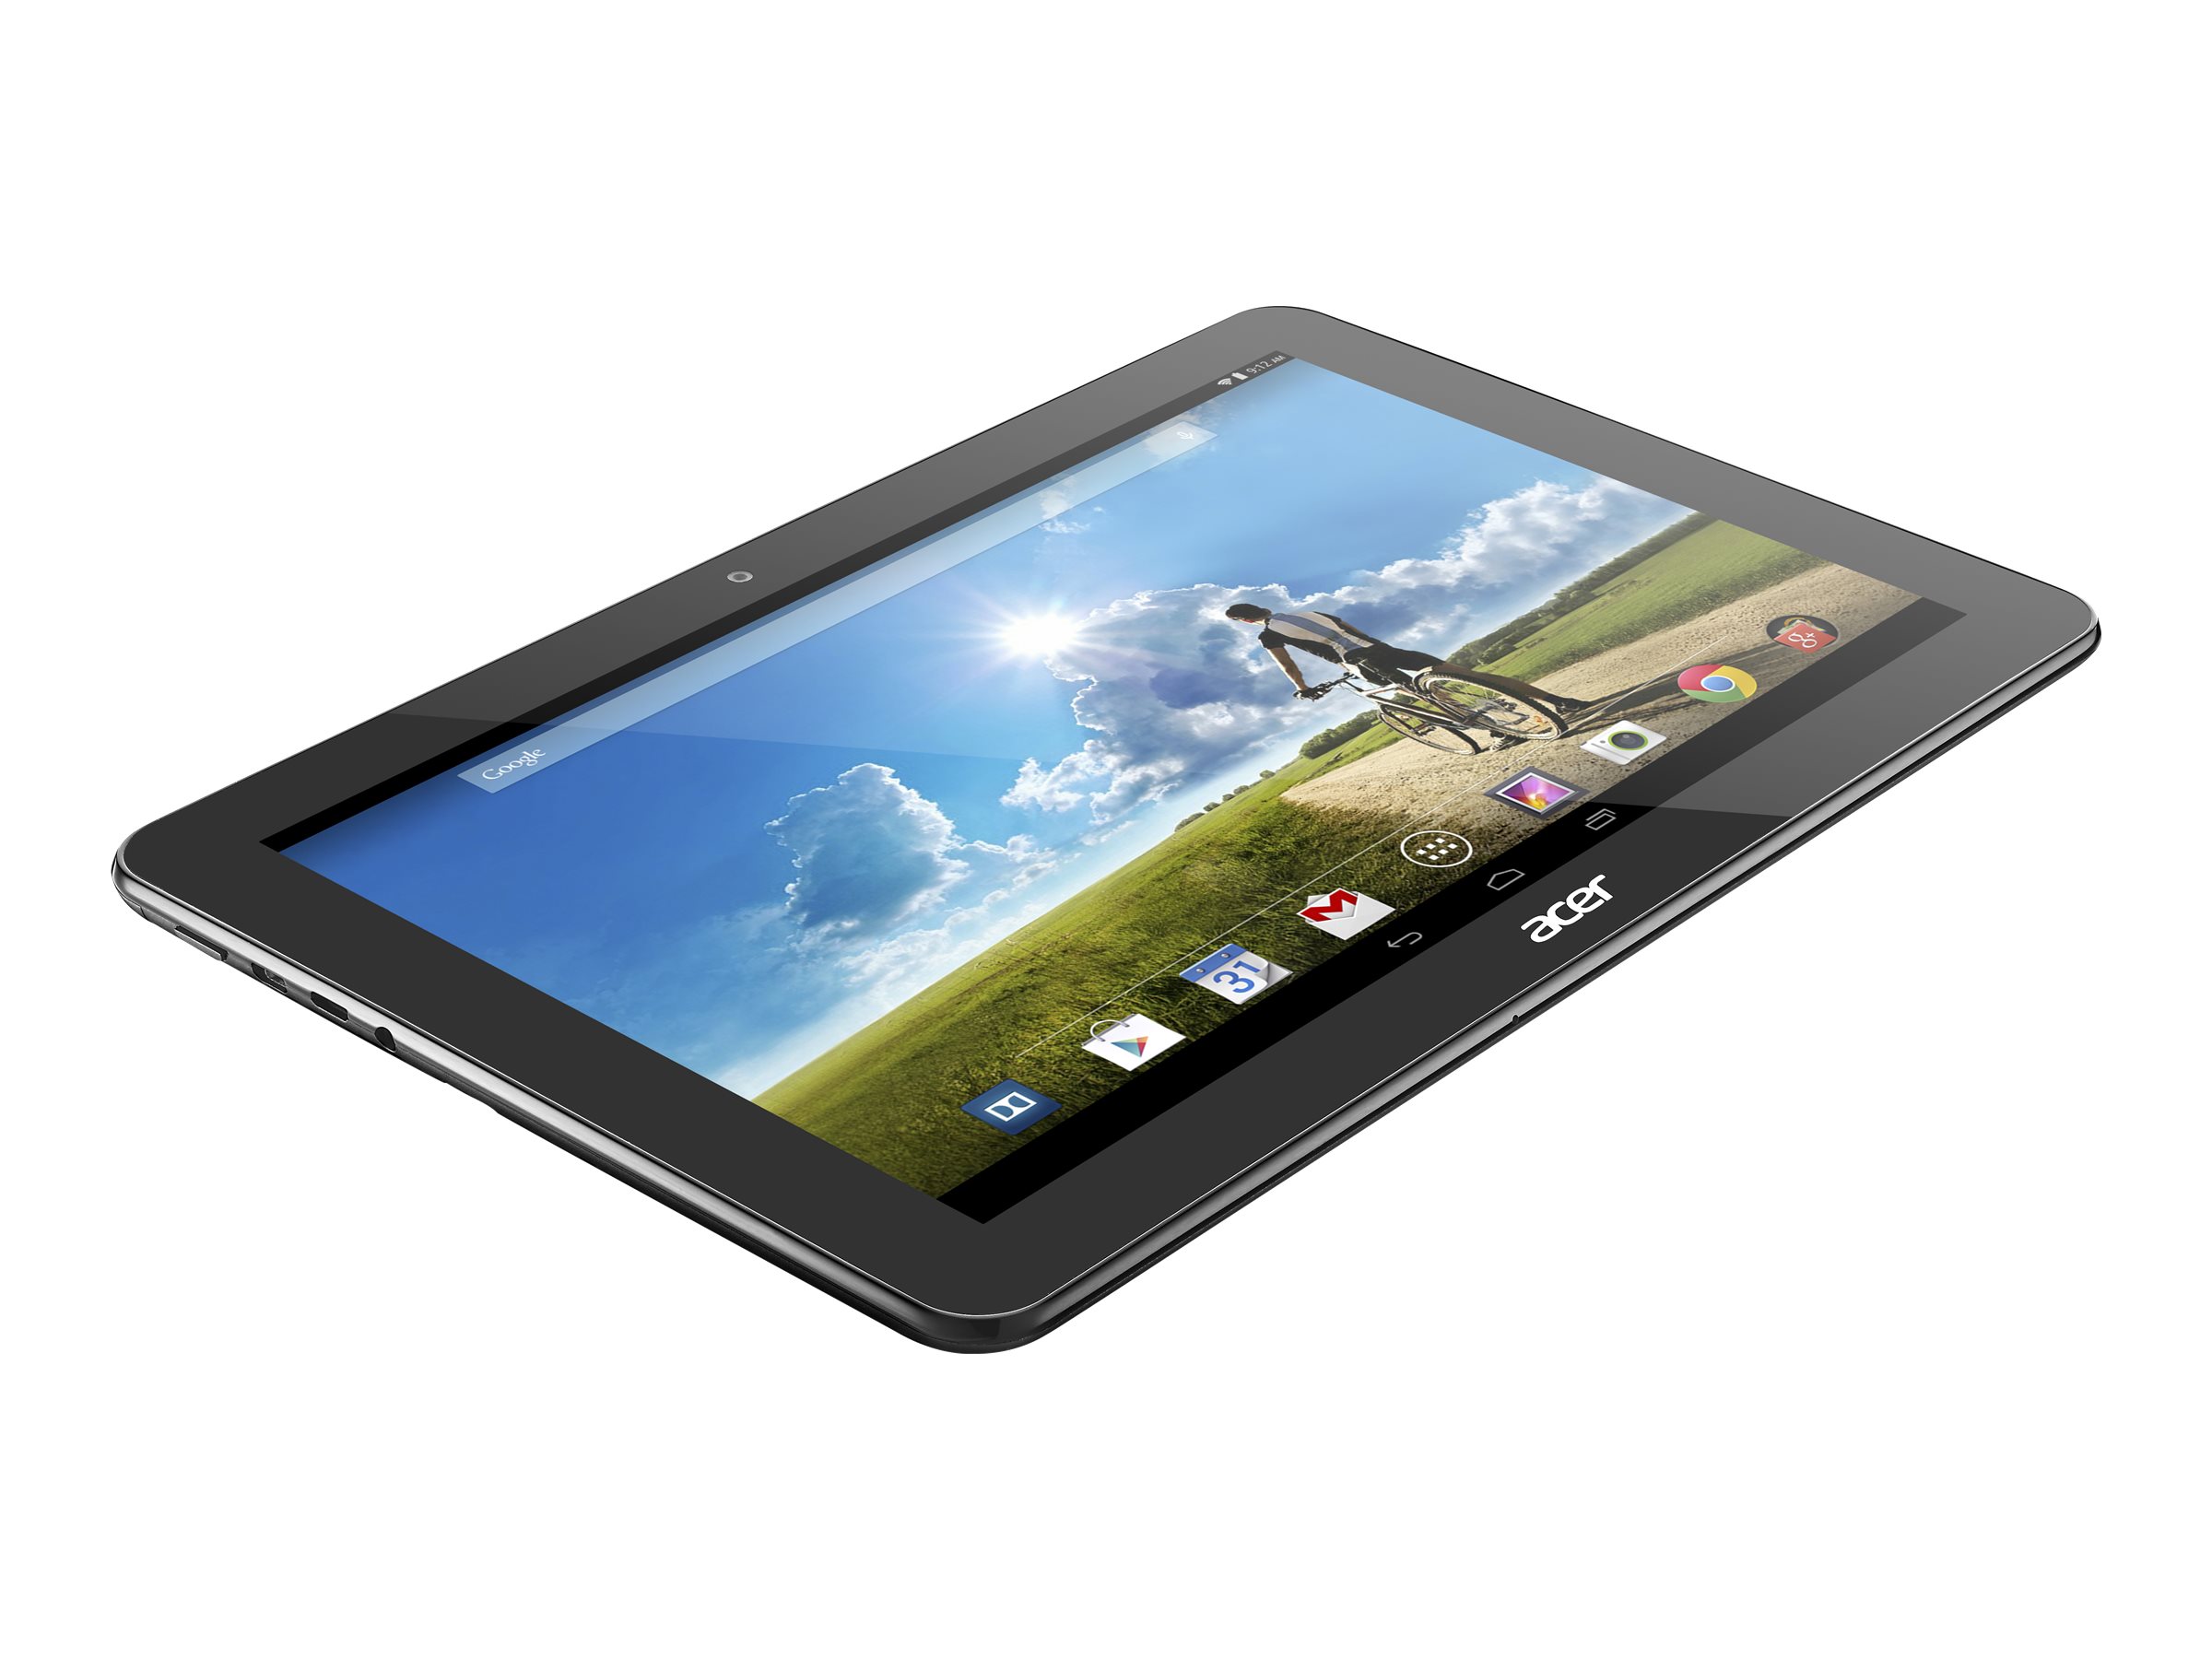 Acer ICONIA A3-A20 A3-A20-K19H Tablet, 10.1" WXGA, Cortex A7 Quad-core (4 Core) 1.30 GHz, 1 GB RAM, 16 GB Storage, Android 4.4 KitKat - image 5 of 13